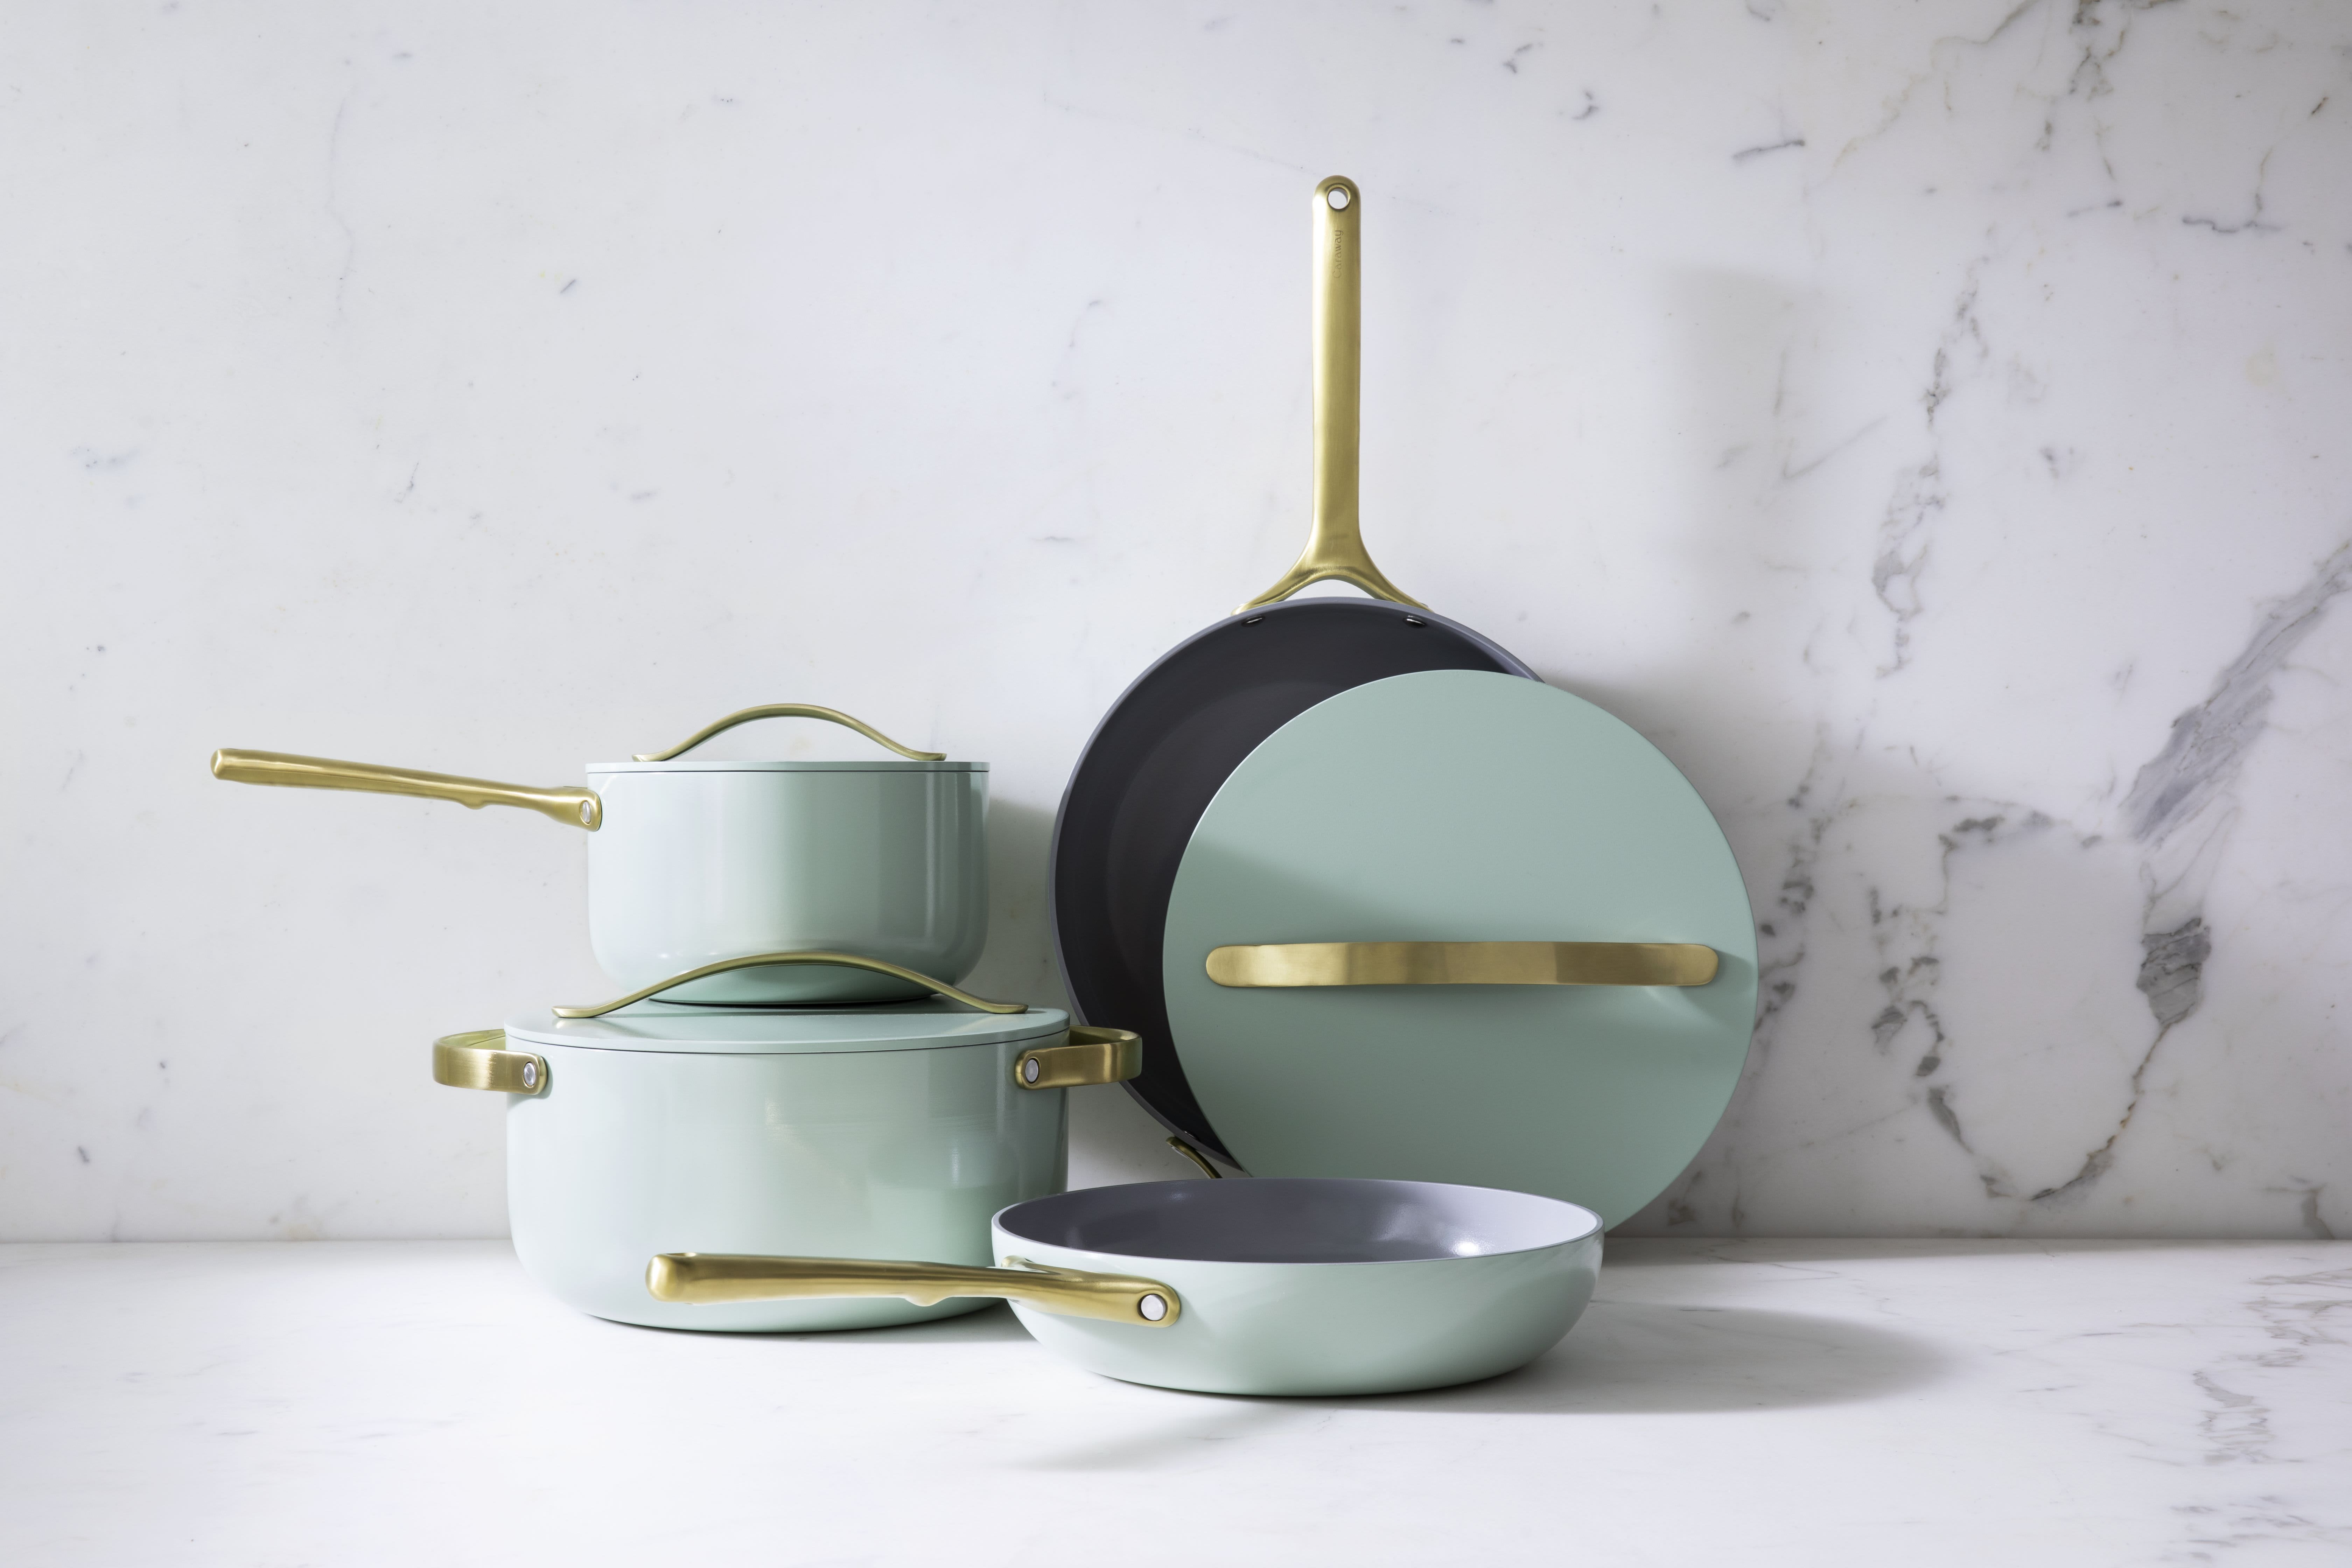 Crate&Barrel Launched a Gorgeous, Limited-Edition Color of Caraway Cookware